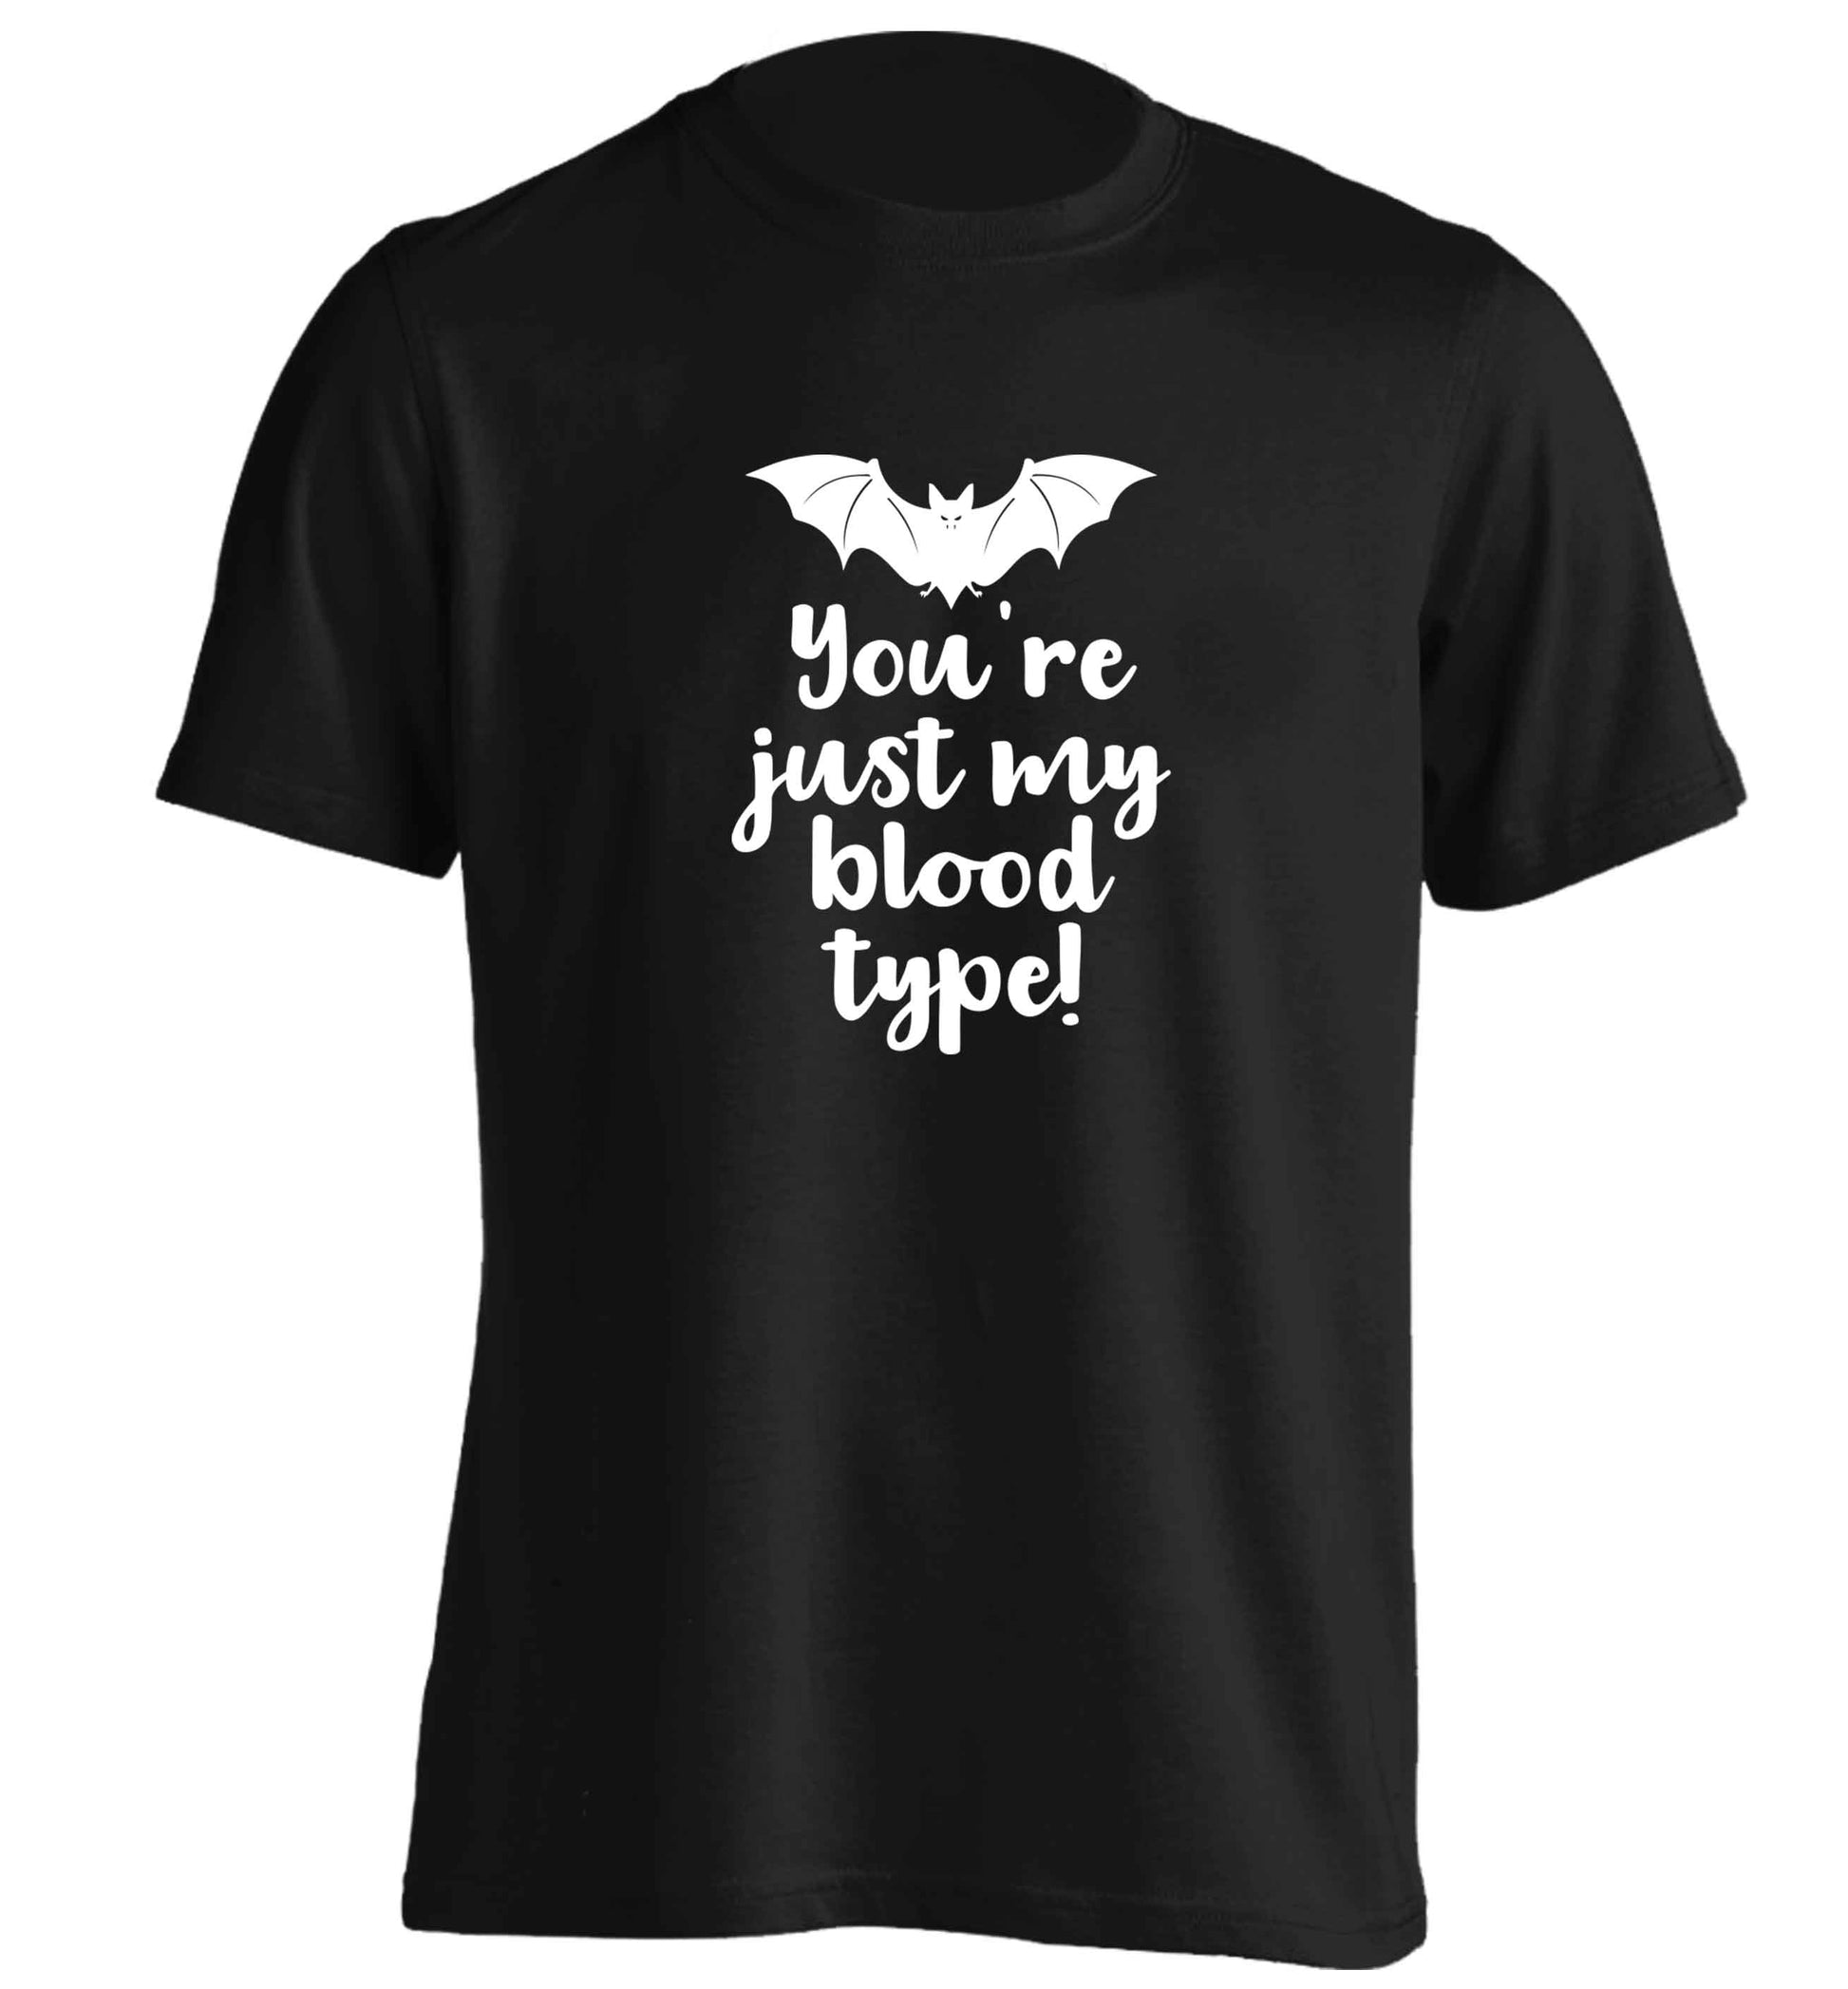 You're just my blood type adults unisex black Tshirt 2XL